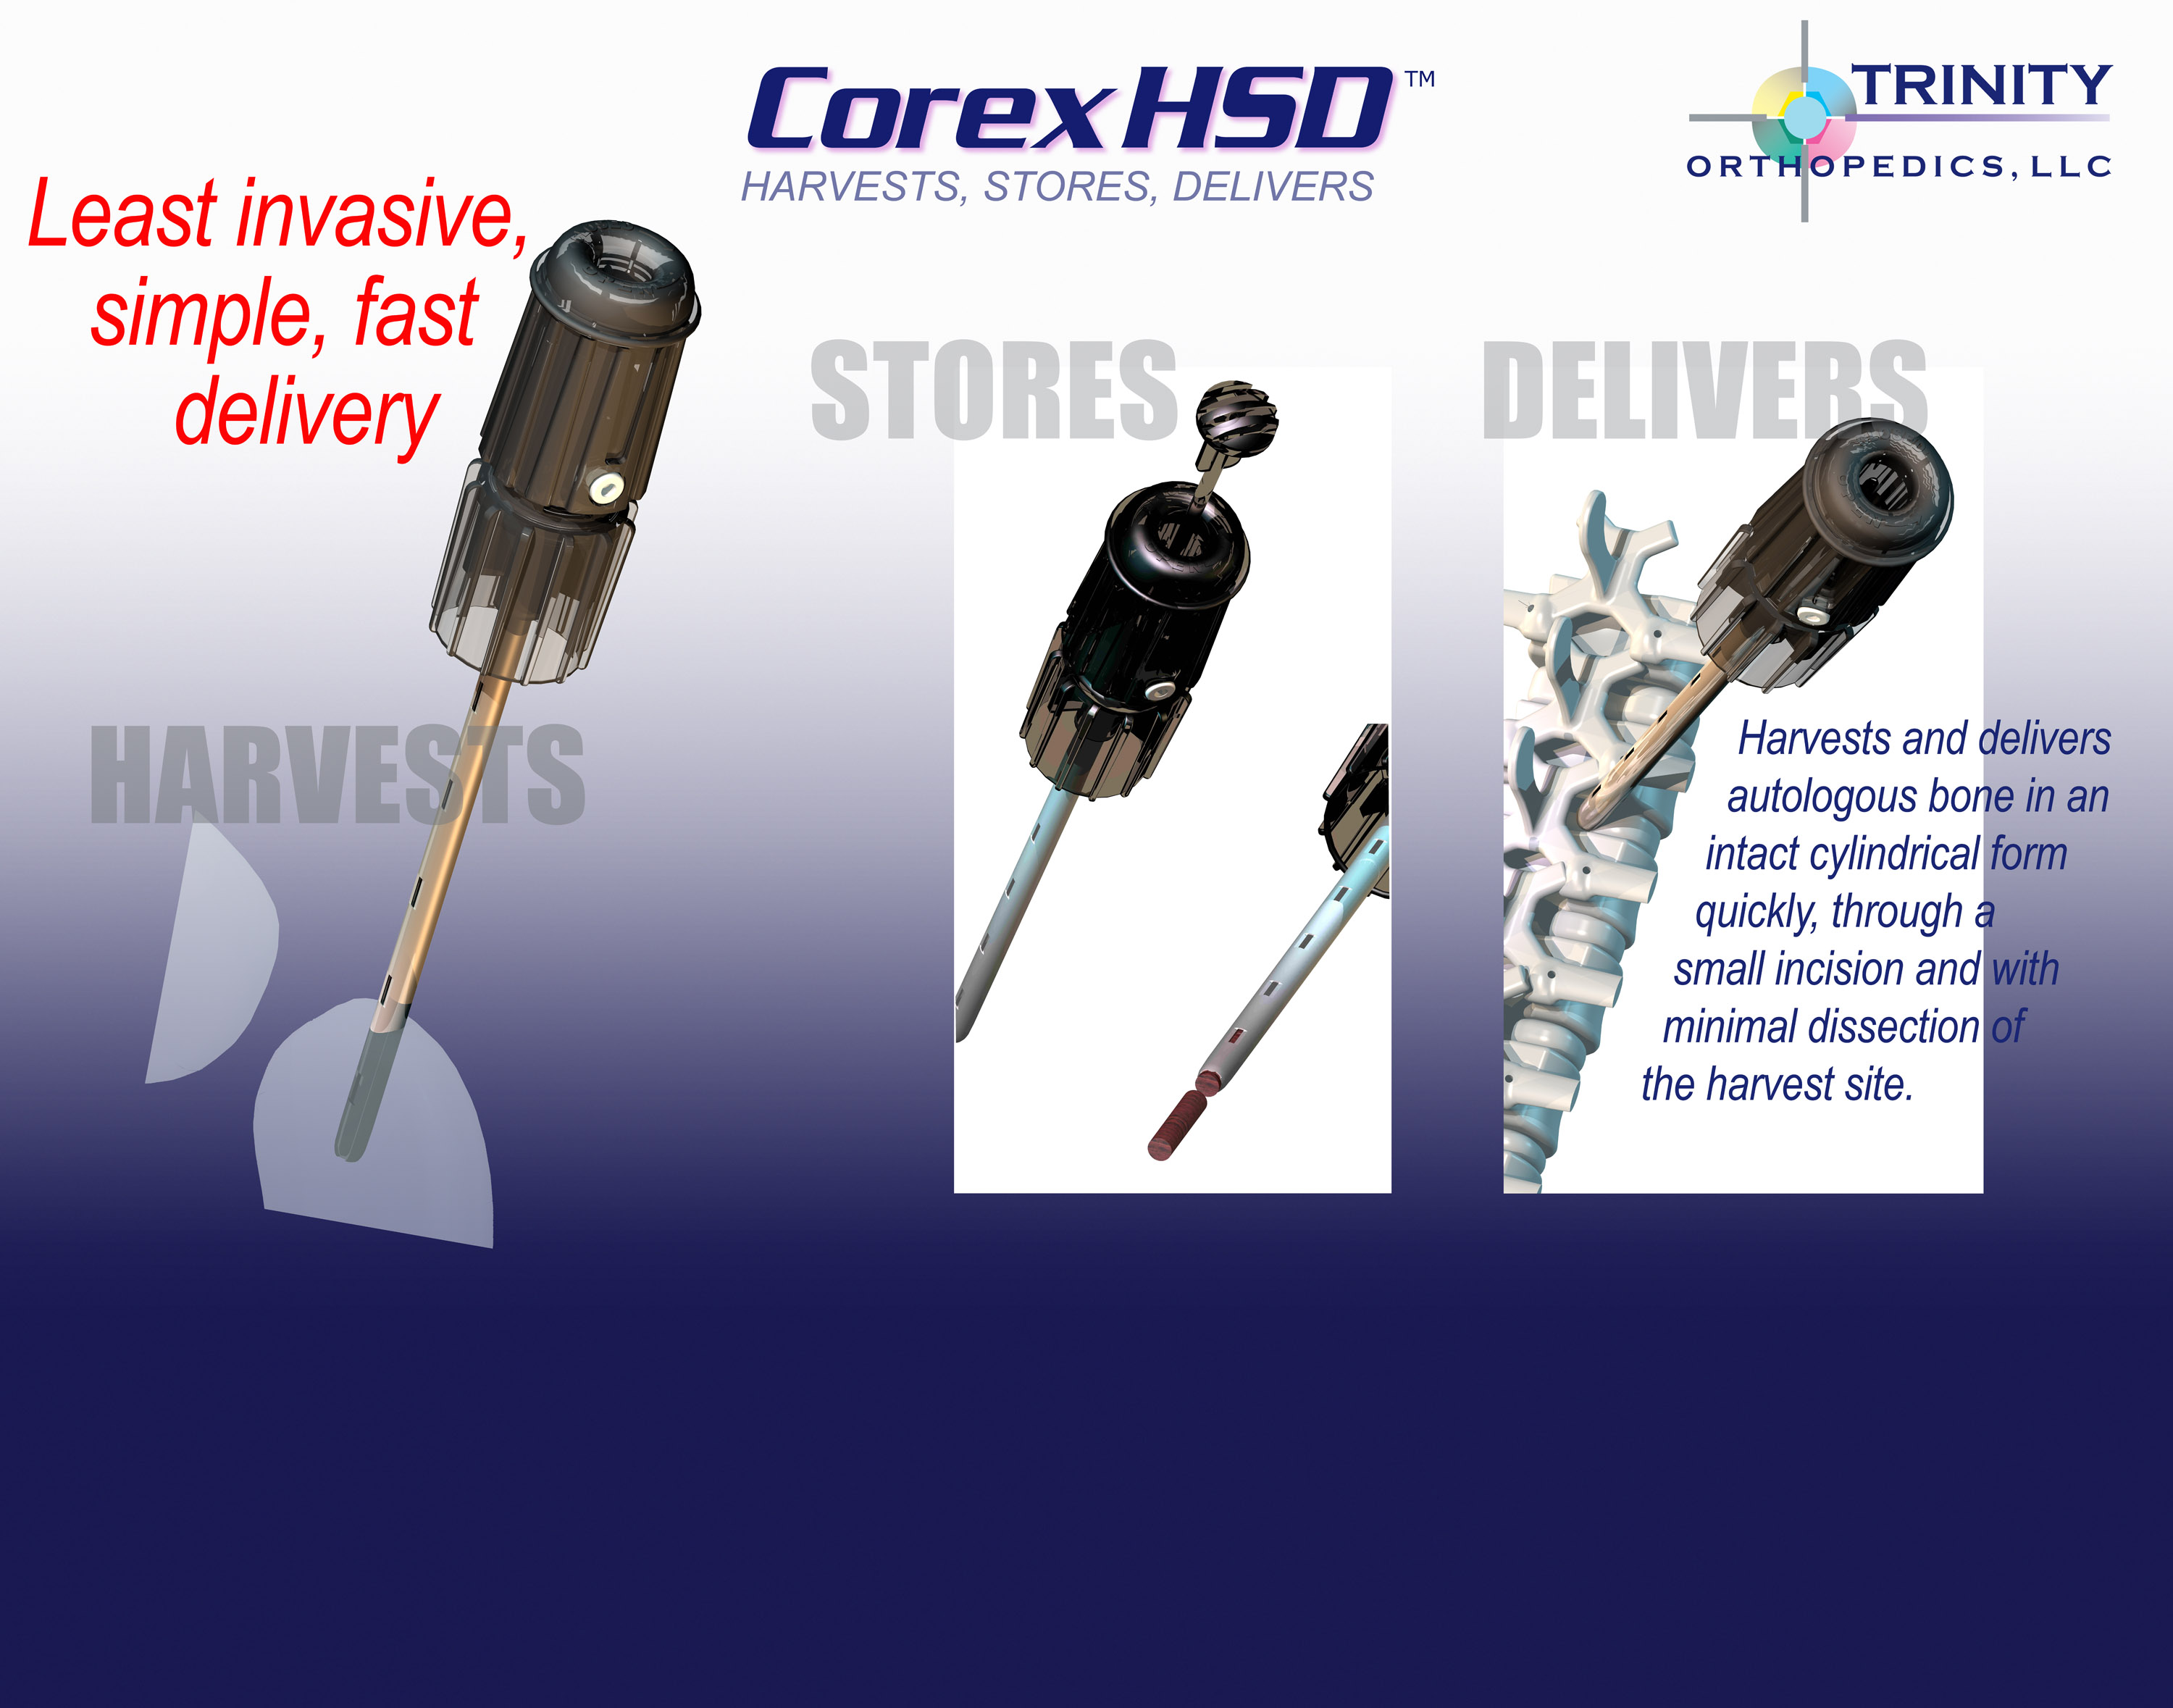 LorexHSD RTI=INITY

HARVESTS, STORES, DELIVERS SIRERSEEDIIC SHEE

Least invasive, gm
simple, fast ja
delivery

J

 
     

(4

     

    

“)
7597
Jr
/» Harvests and delivers
autologous bone in an

!
intact cylindrical form

/ “ly
| - | - quickly, through

   

small incision and
minimal dissection
J] the harvest site.